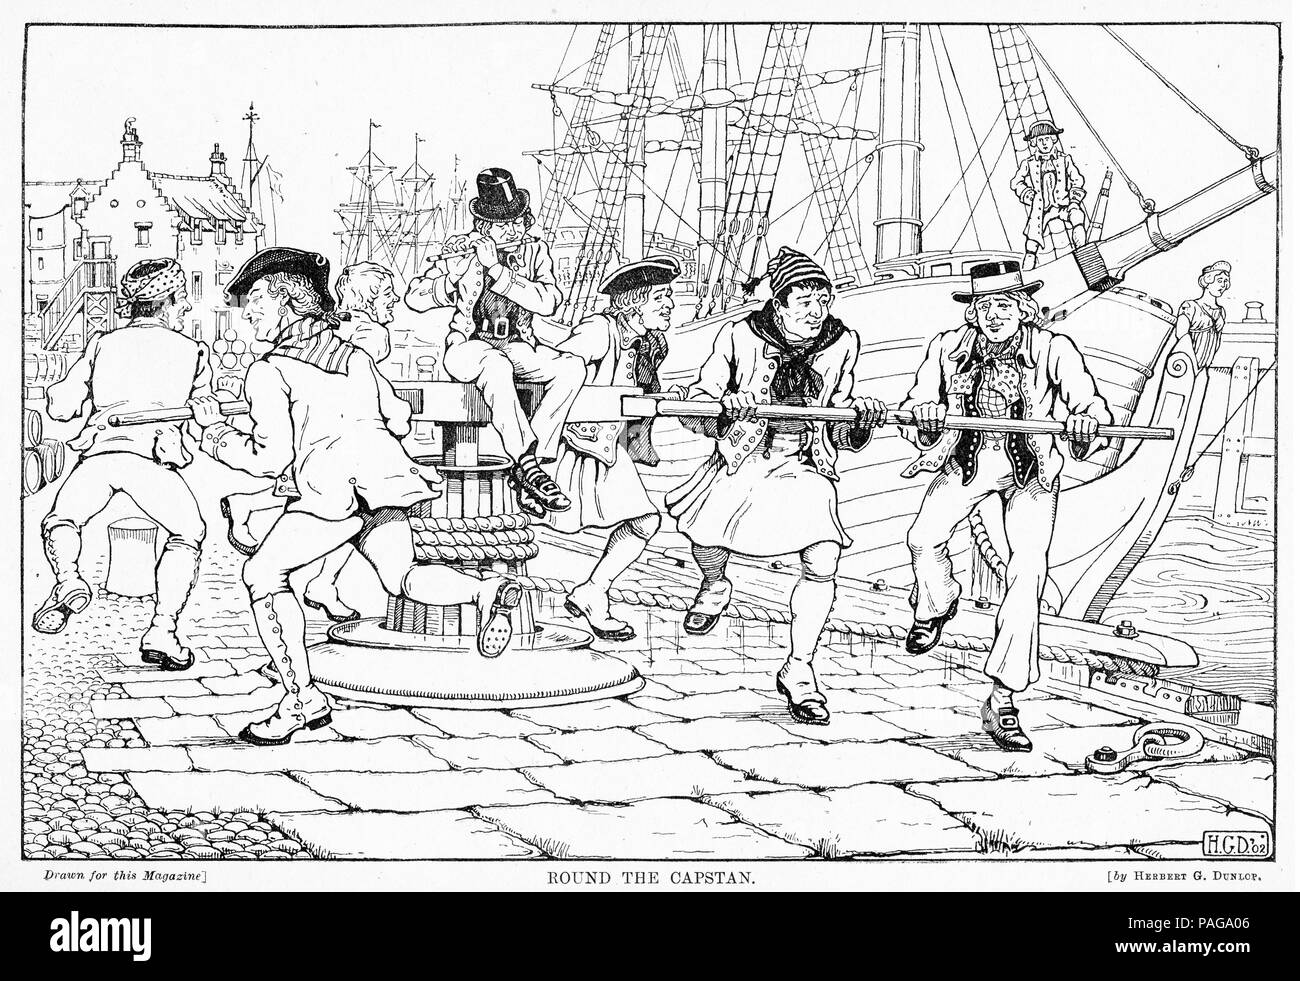 Engraving of sailors pushing around the capstan to raise the anchor. From Young England, An Illustrated Monthly for Boys, 1903. Stock Photo